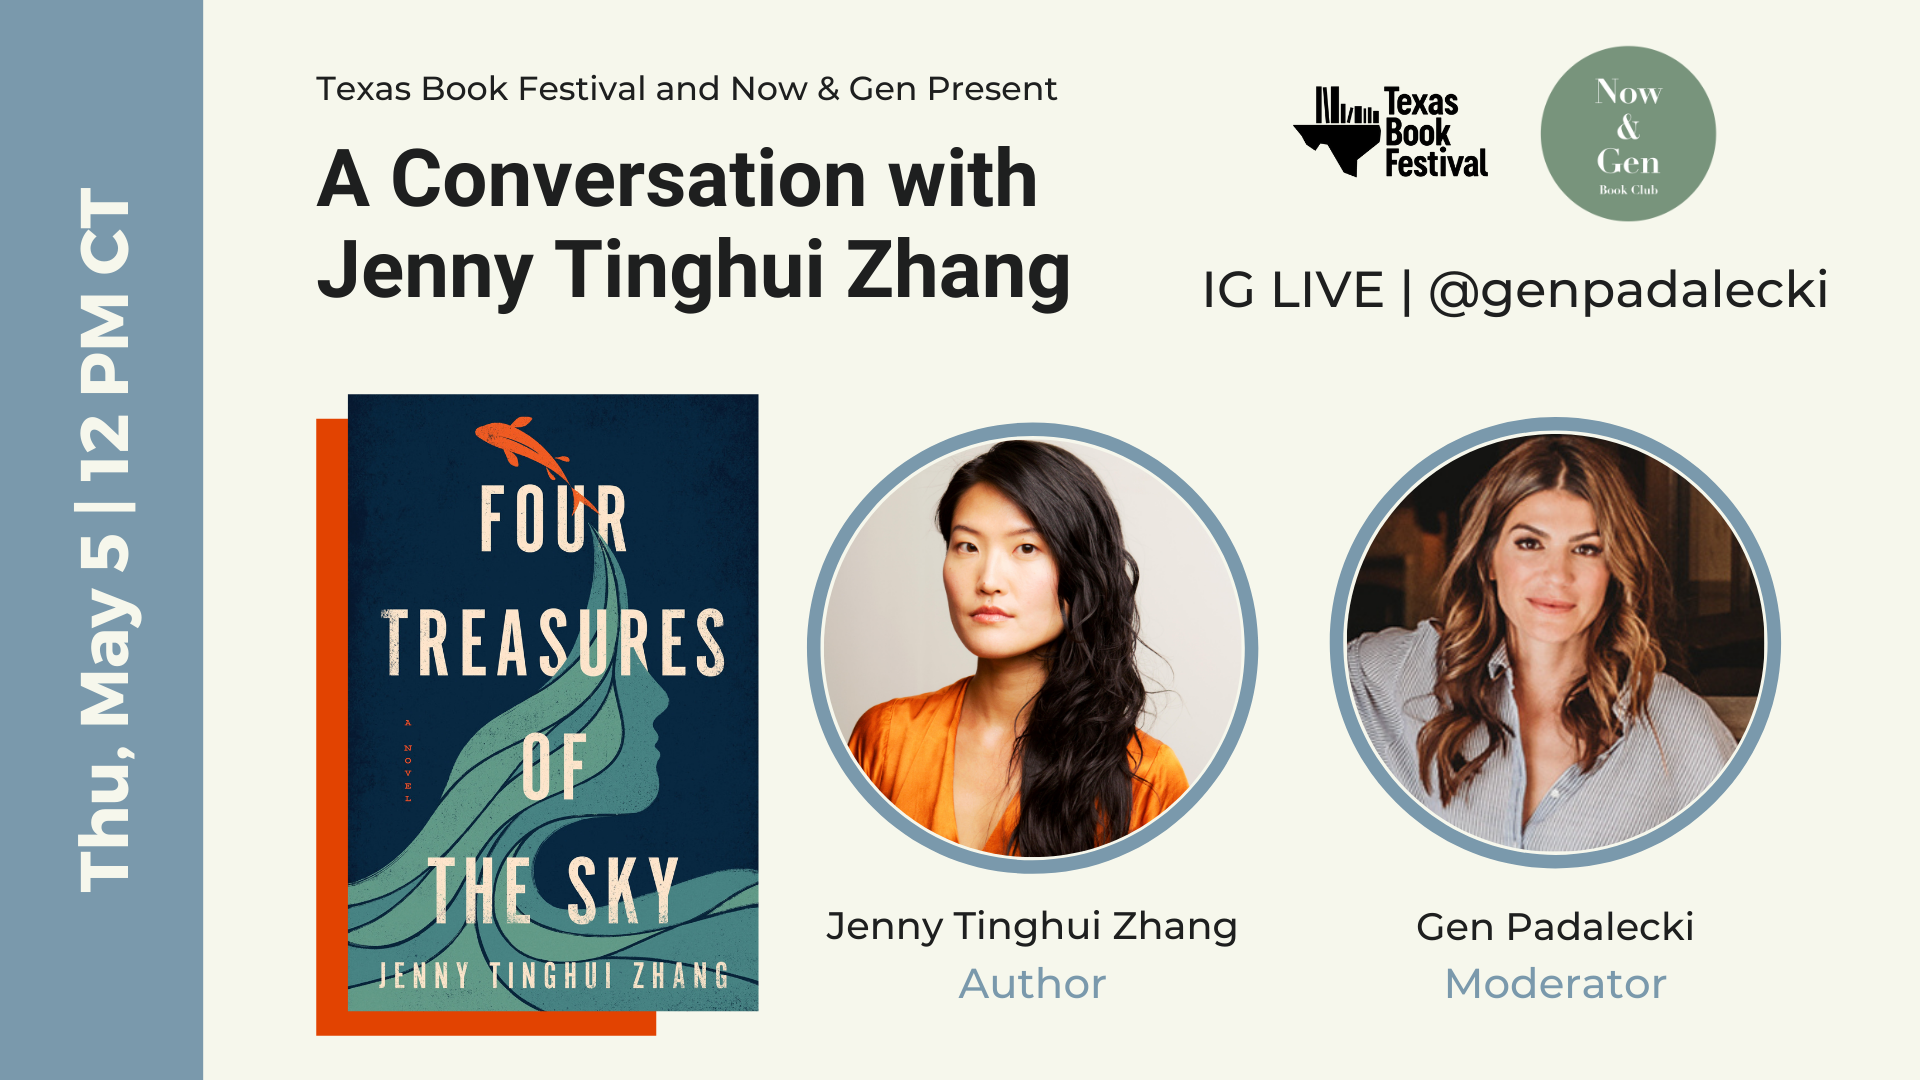 FOUR TREASURES OF THE SKY: A Conversation with Jenny Tinghui Zhang & Gen Padalecki